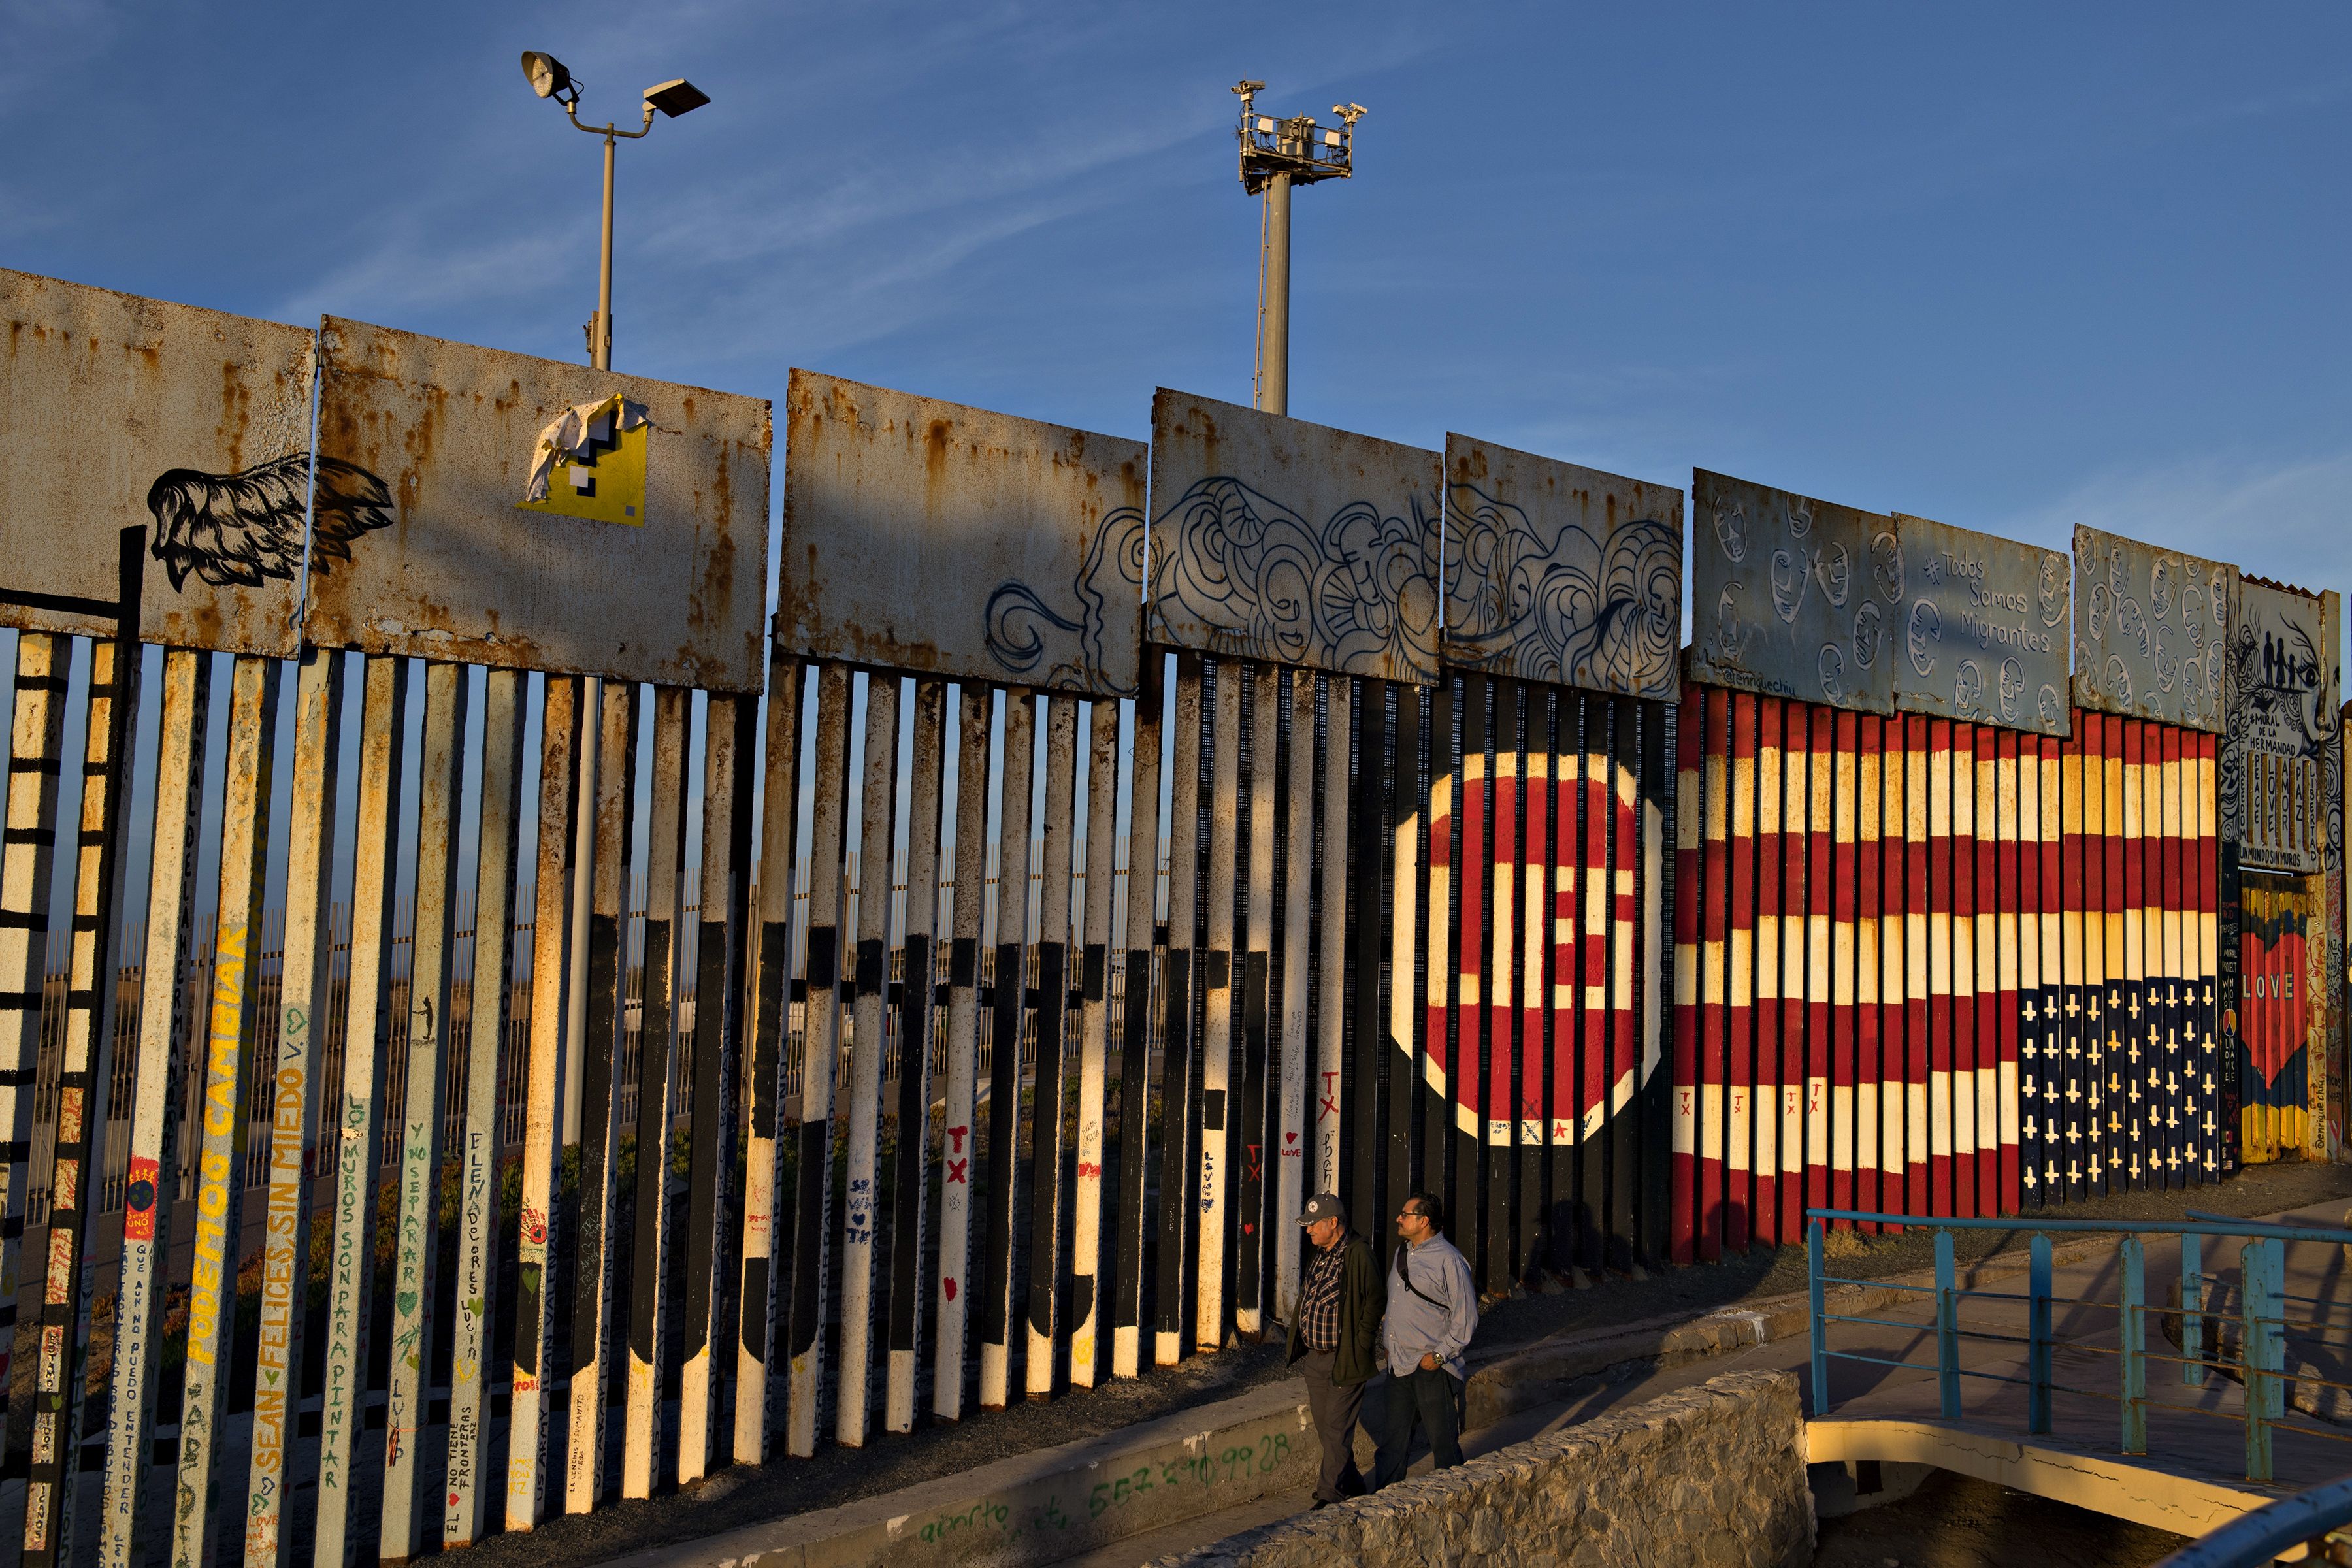 Visitors to Playas de Tijuana stop by the border wall at Friendship Park to look over artwork Dec. 1. Friendship Park is located along the United States-Mexico border in the San Diego-Tijuana region and is a half-acre in size. Image by Amanda Cowan. Mexico, 2019.